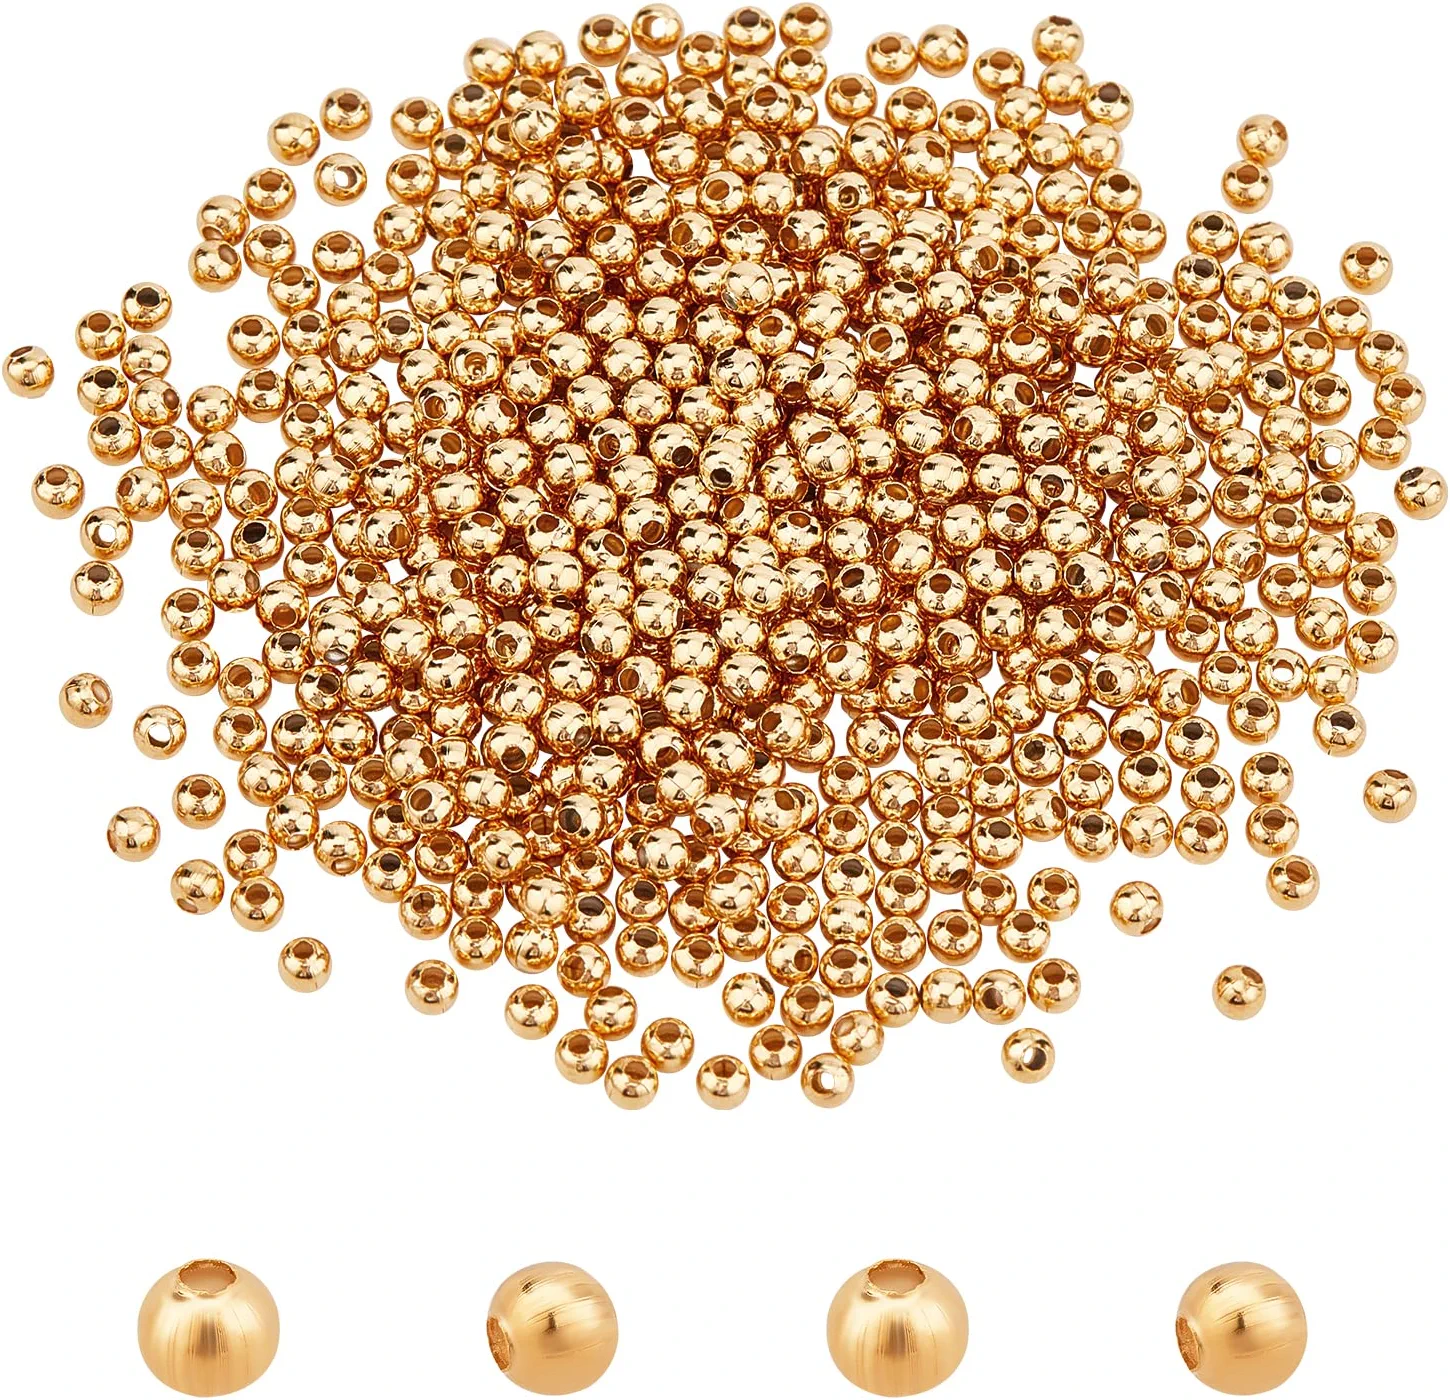 DECYOOL 1200pcs 4mm Smooth Round Beads Gold Spacer Loose Ball Beads for Bracelet Jewelry Making Craft